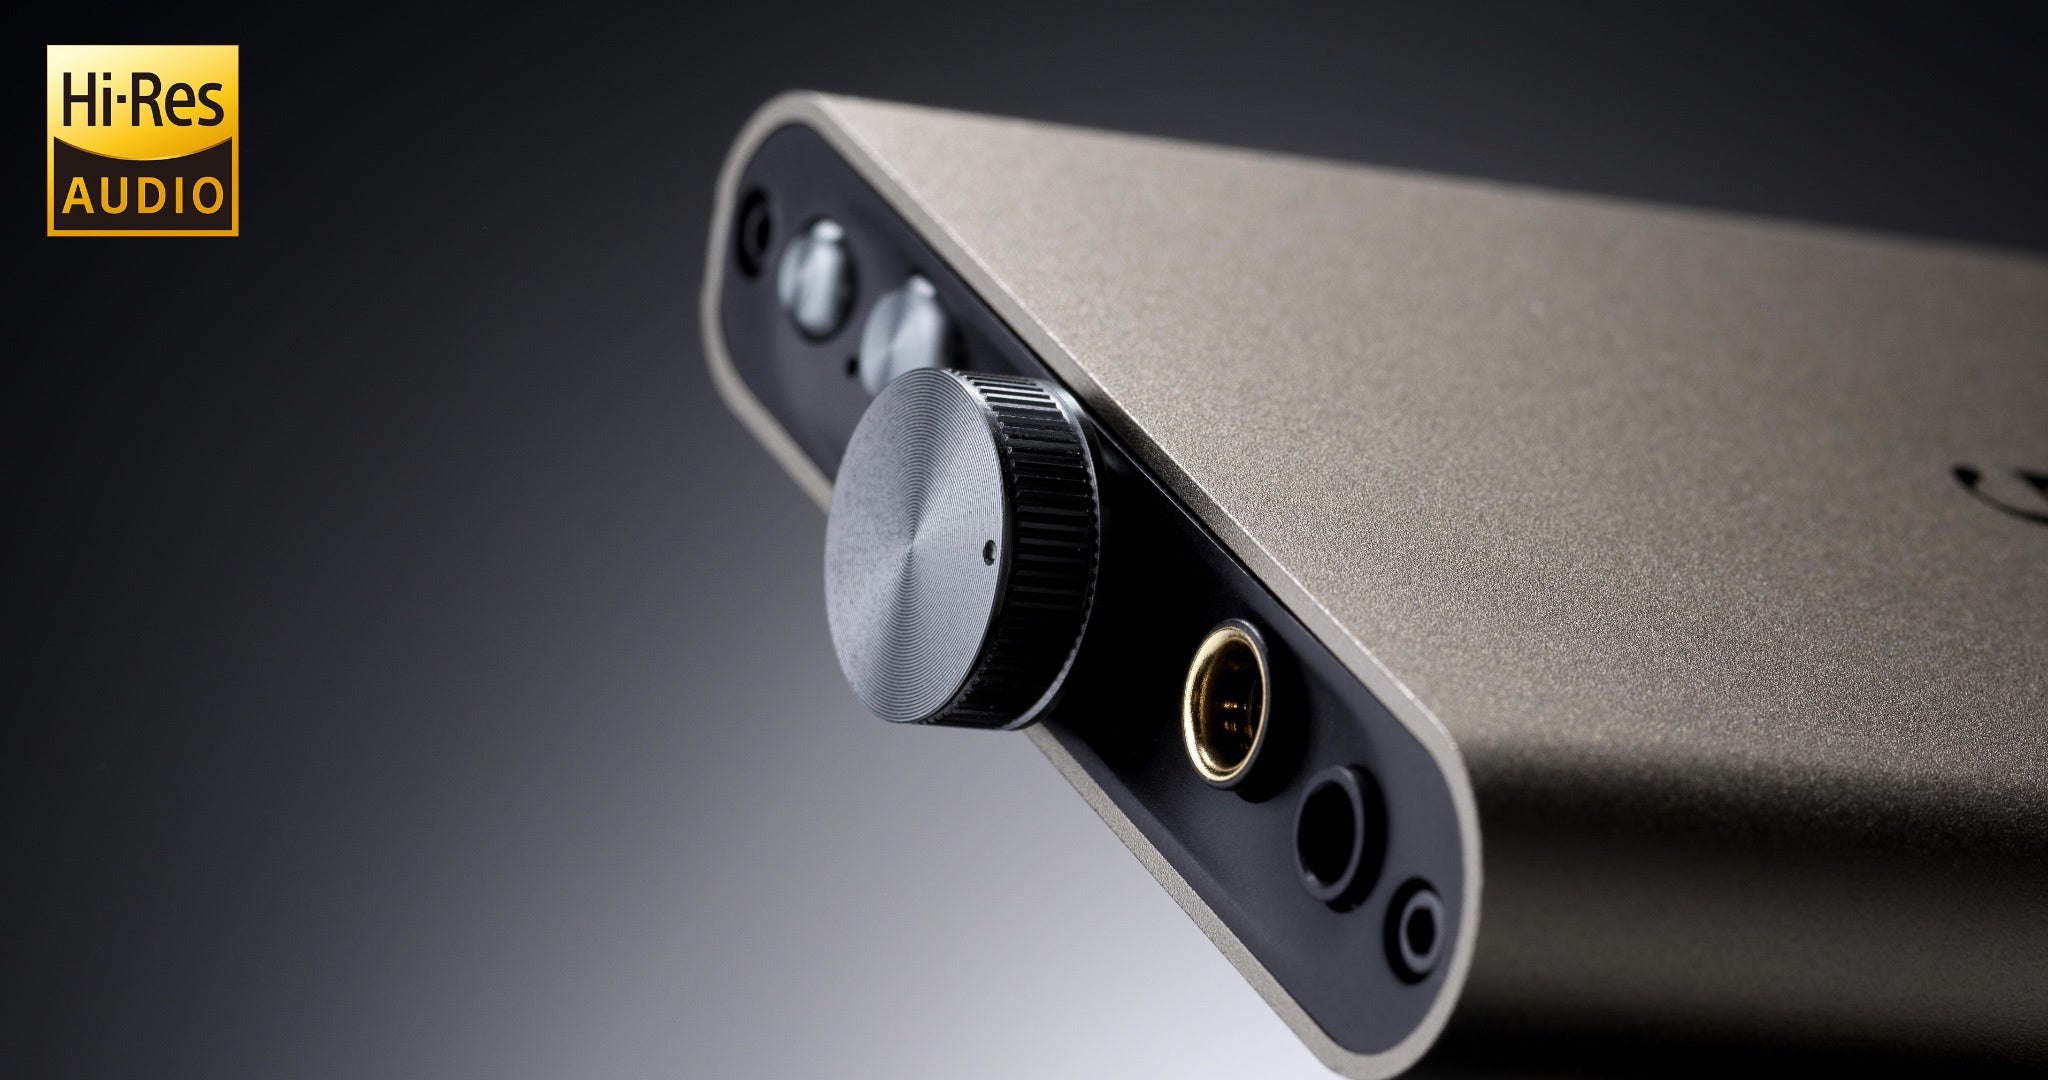 ifi hip-dac 3 dramatic closeup front volume knob and inputs over gray gradient with Hi-Res audio logo